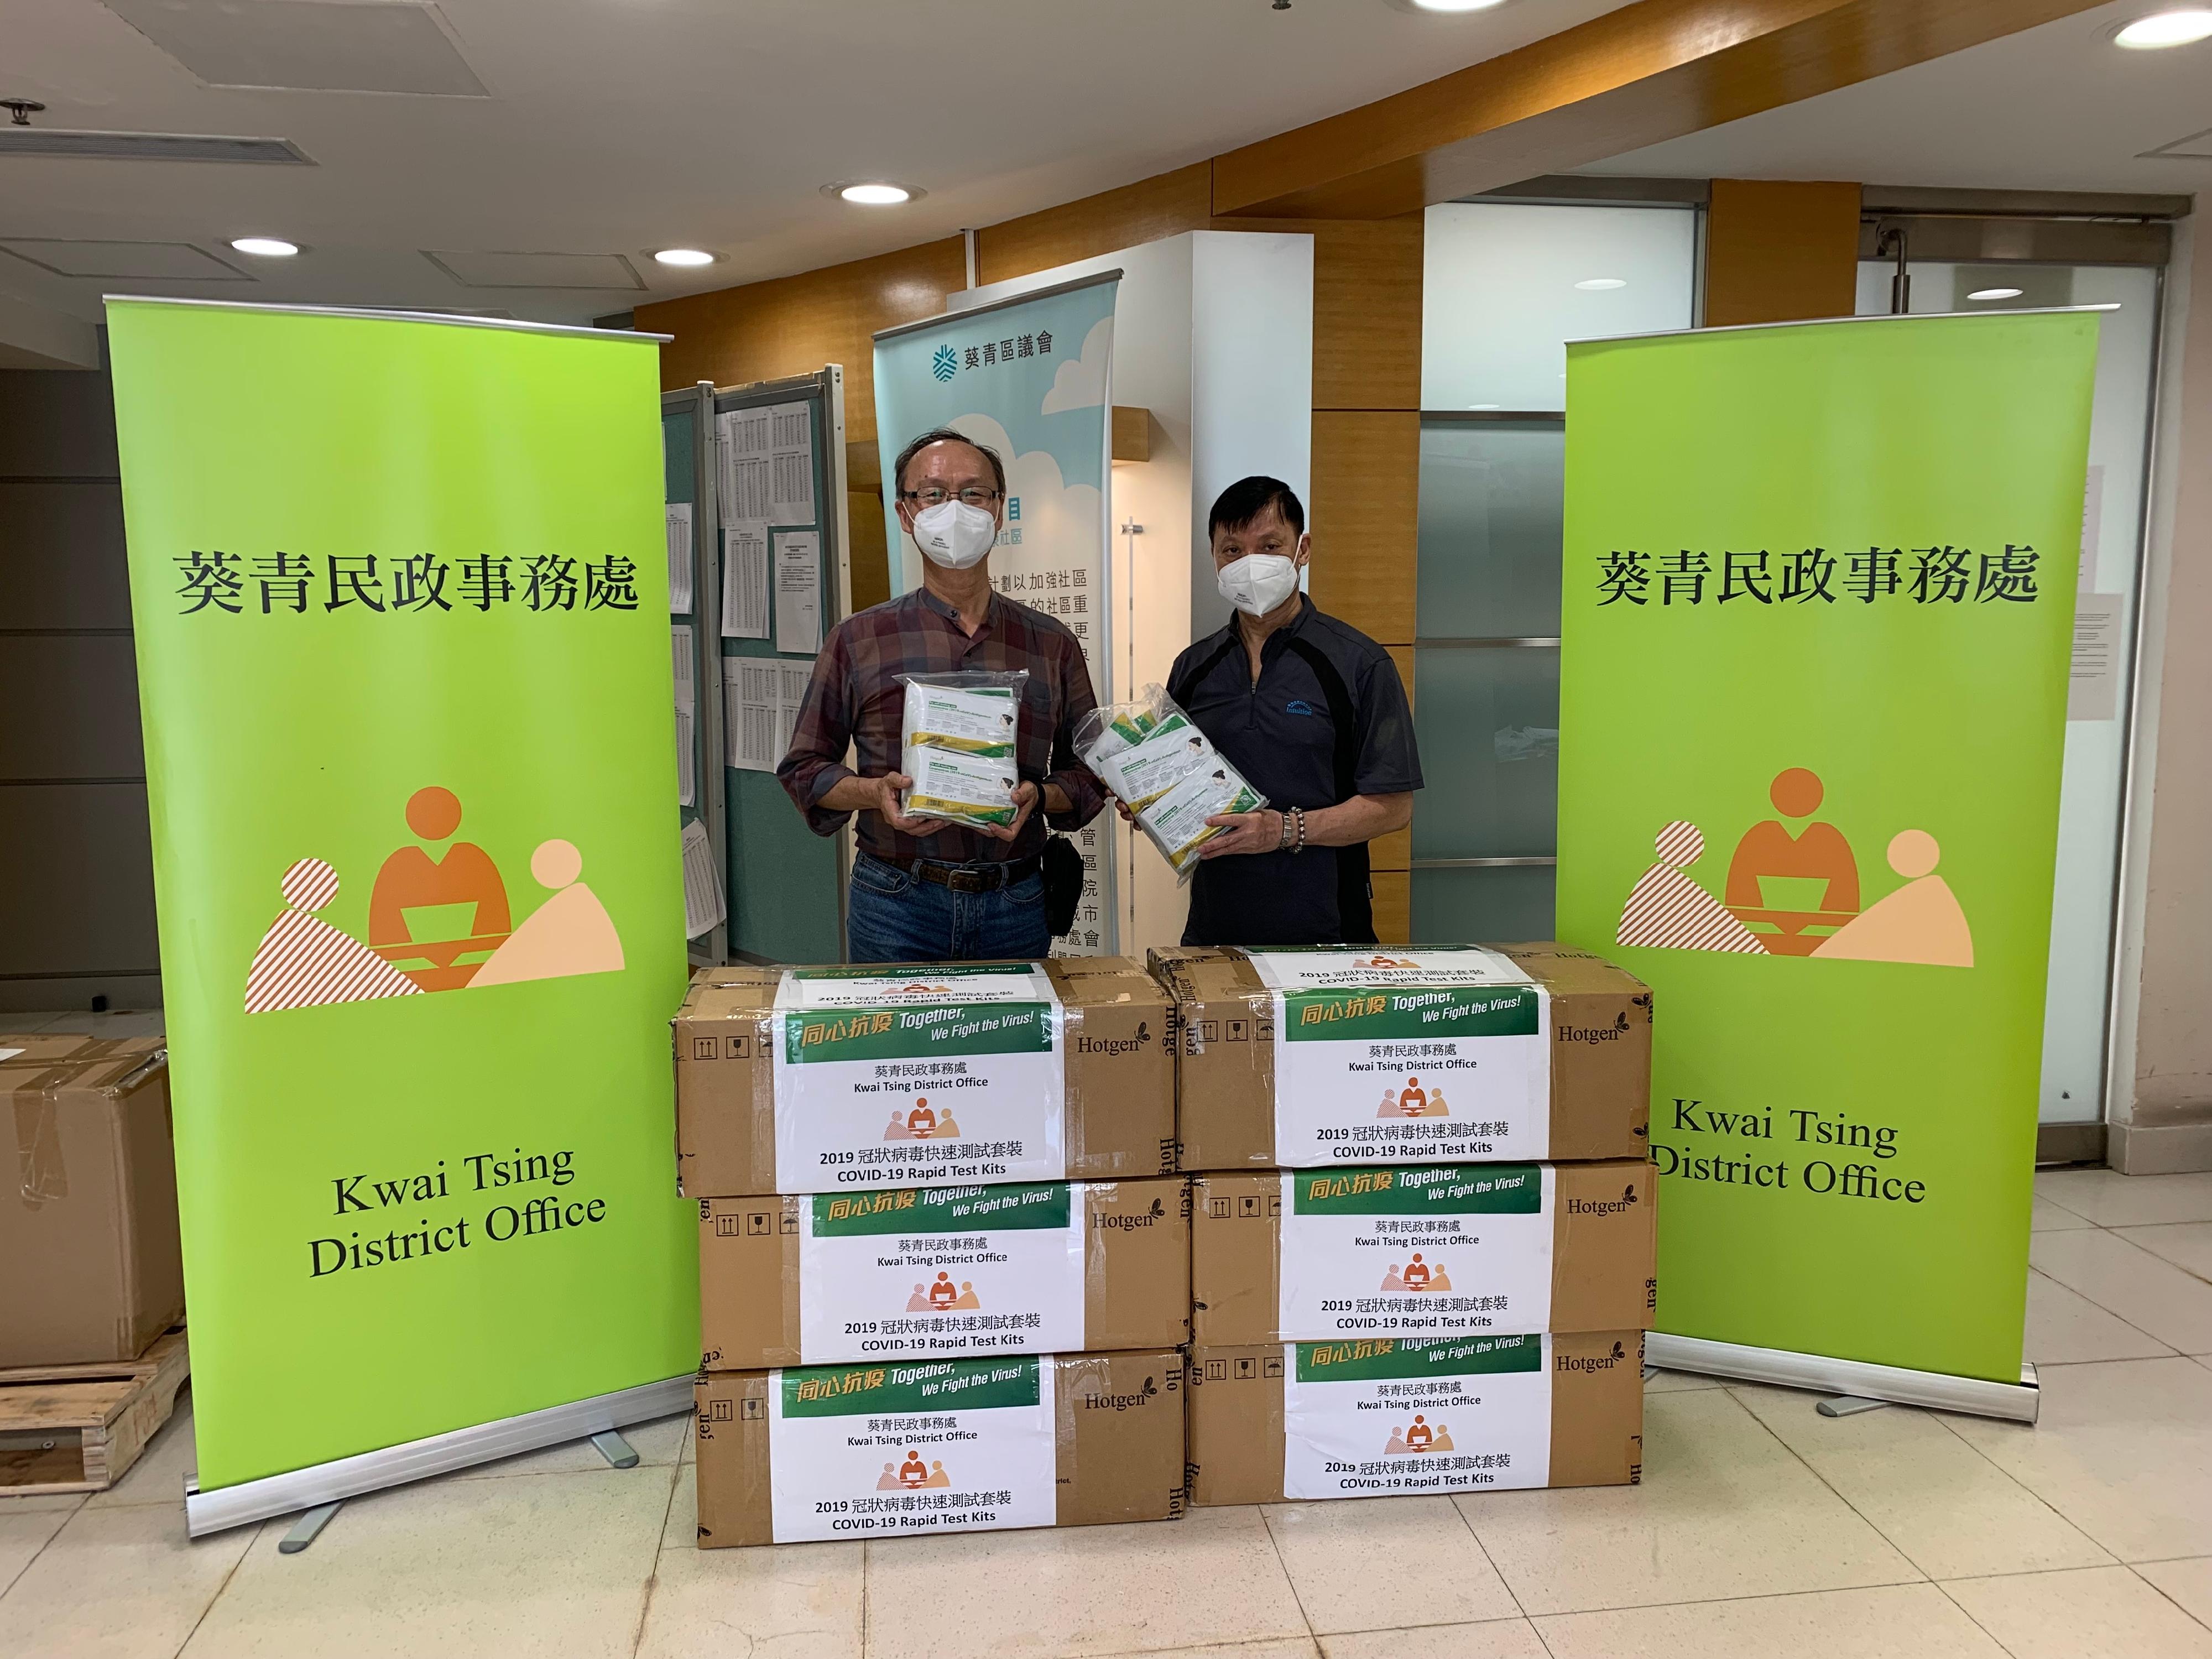 The Kwai Tsing District Office today (April 27) distributed COVID-19 rapid test kits to households, cleansing workers and property management staff living and working in residential premises around Shek Yam Road for voluntary testing through the property management company.